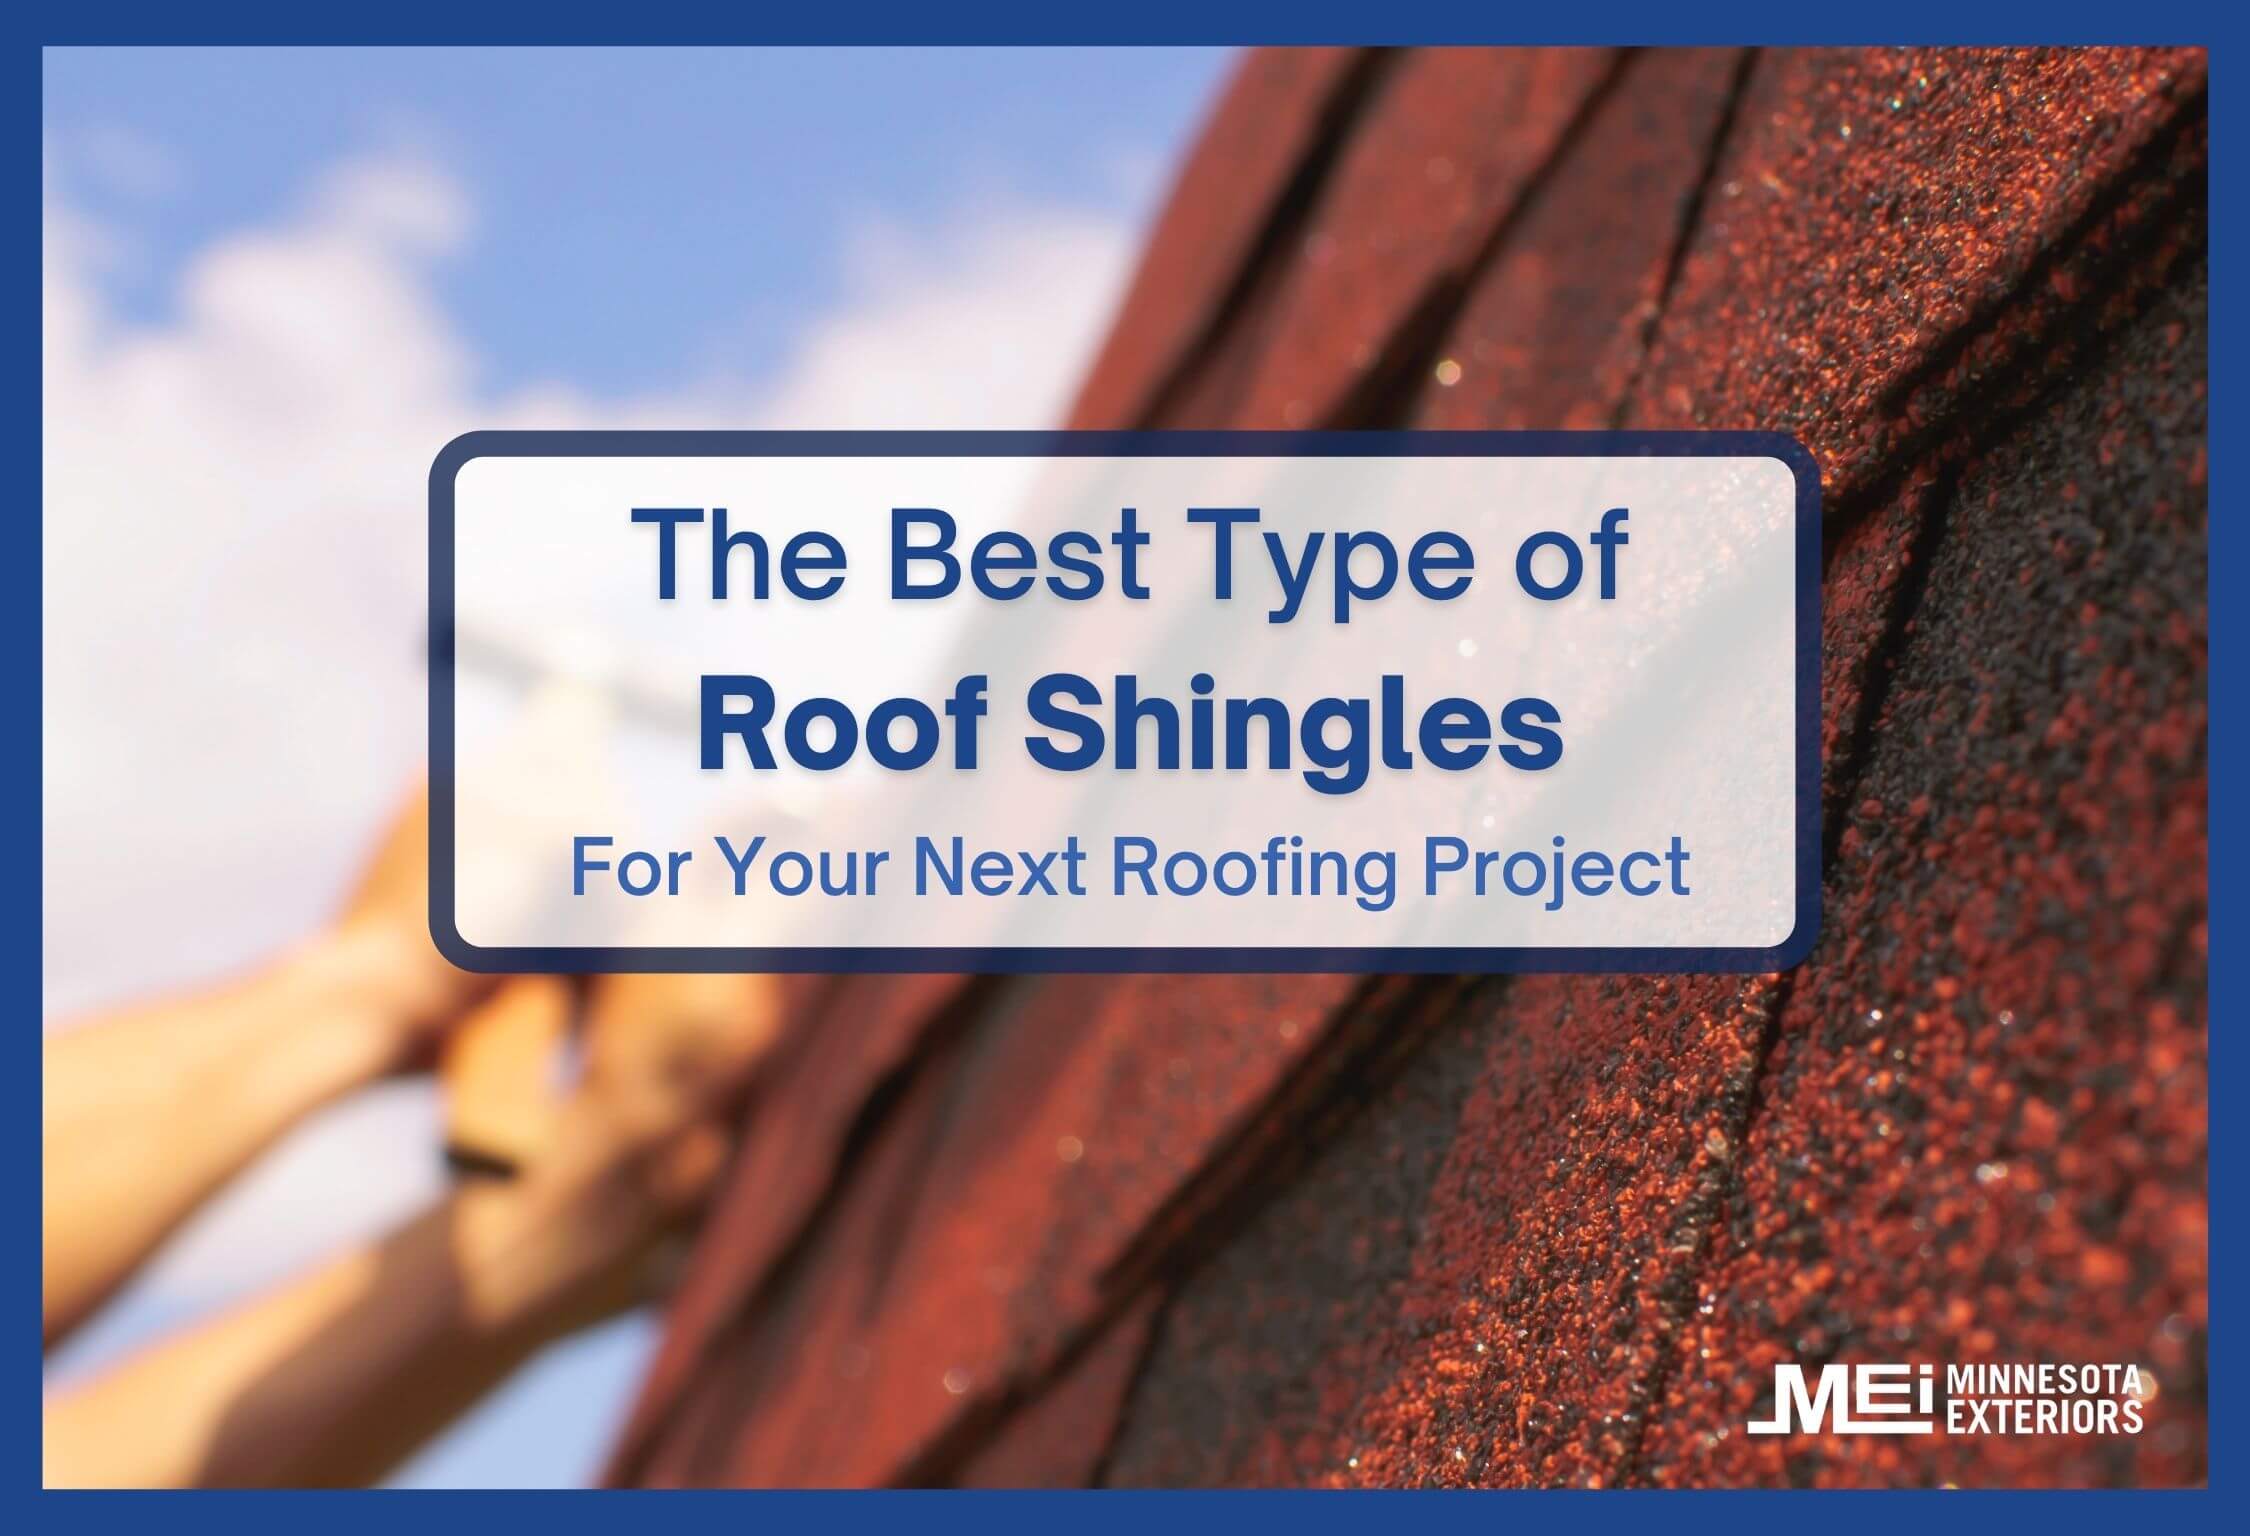 The best type of roof shingles